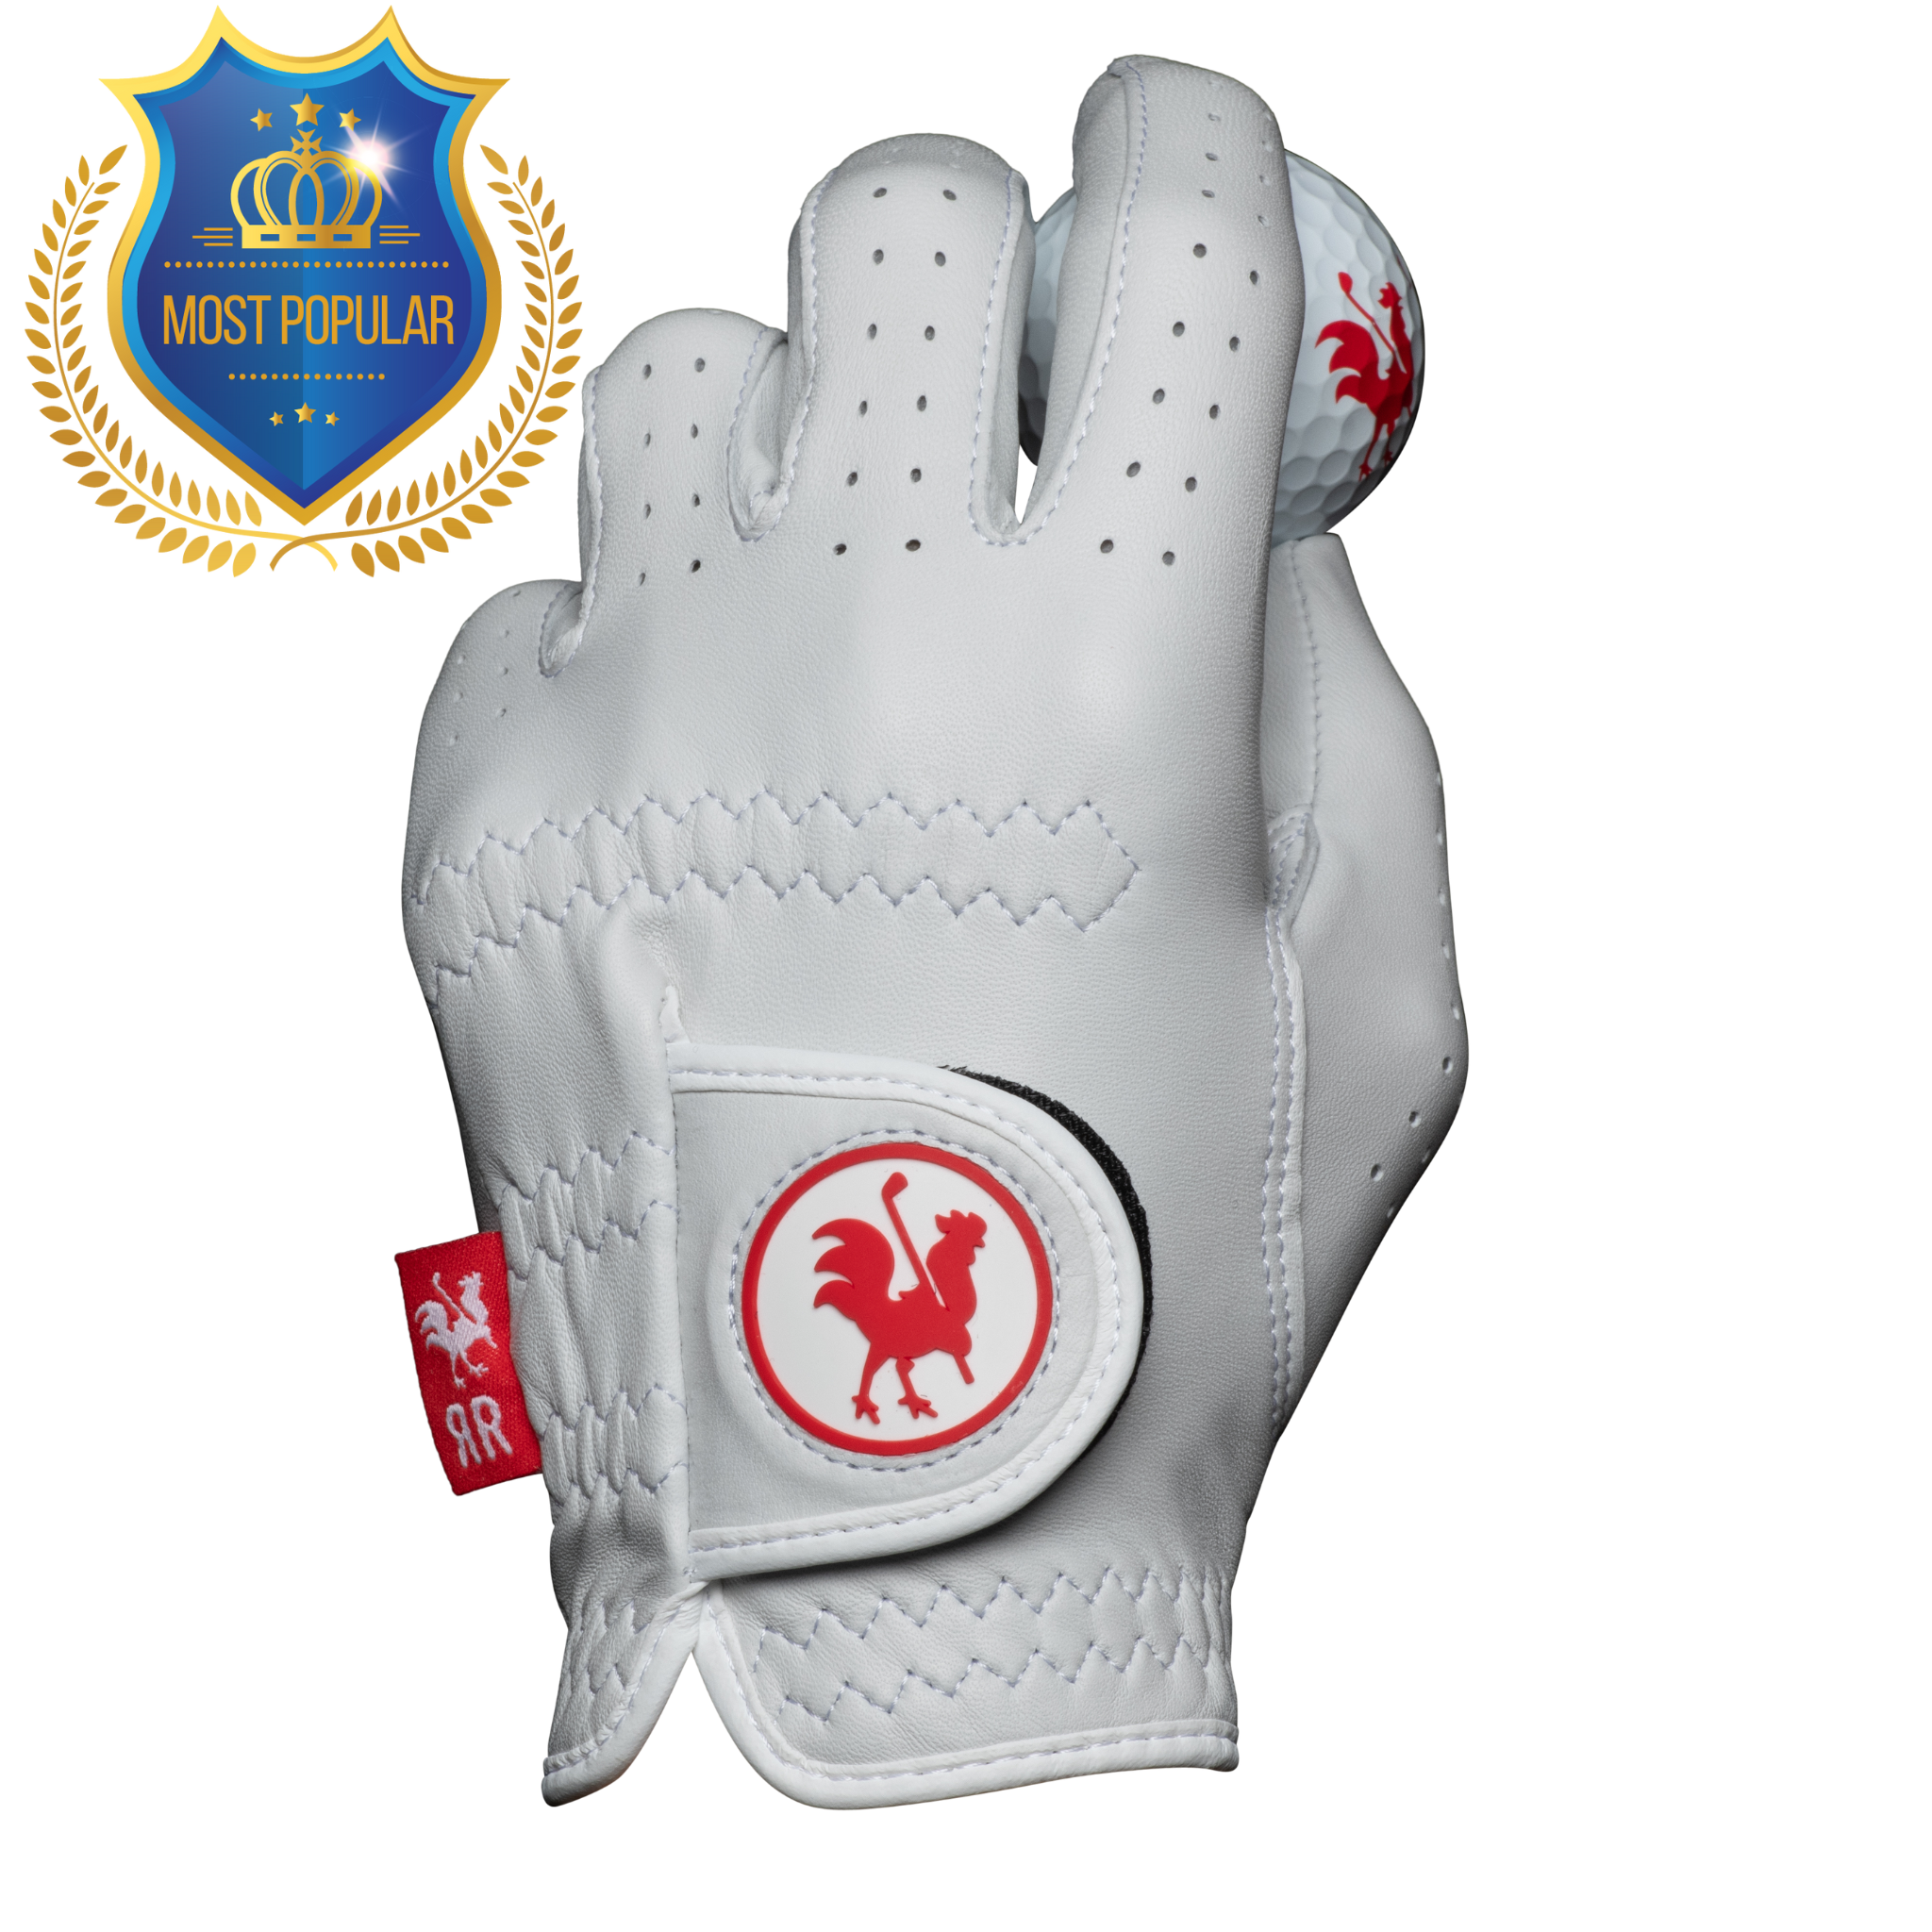 The Feather golf glove